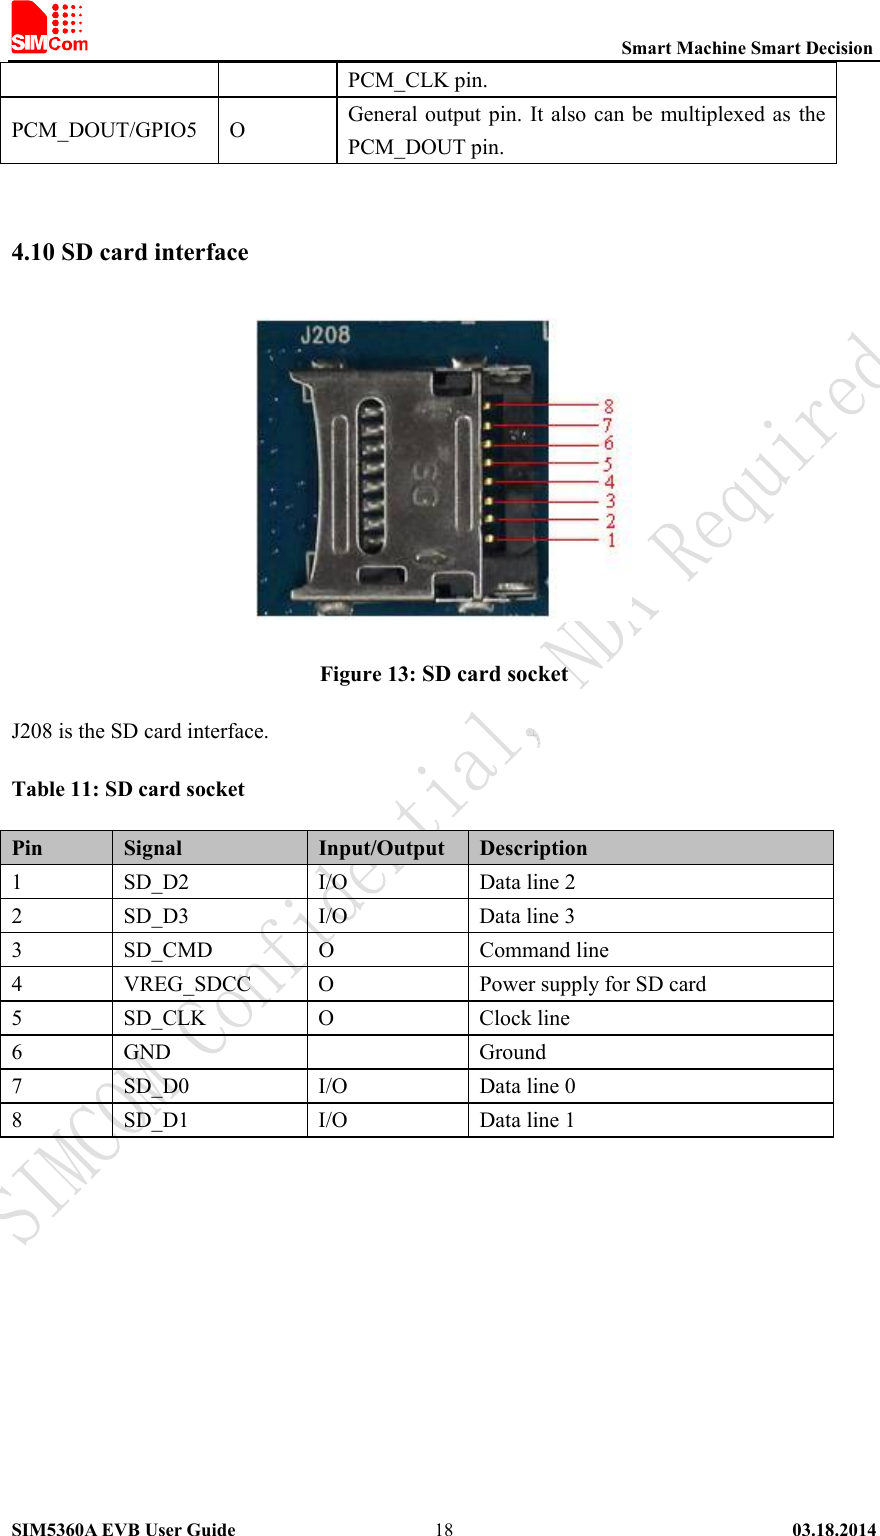                                                          Smart Machine Smart Decision SIM5360A EVB User Guide   03.18.2014   18PCM_CLK pin. PCM_DOUT/GPIO5  O  General output pin. It also can be multiplexed as the PCM_DOUT pin.  4.10 SD card interface  Figure 13: SD card socket J208 is the SD card interface. Table 11: SD card socket Pin  Signal  Input/Output  Description 1  SD_D2  I/O  Data line 2 2  SD_D3  I/O  Data line 3 3  SD_CMD  O  Command line 4  VREG_SDCC  O  Power supply for SD card 5  SD_CLK  O  Clock line 6  GND    Ground 7  SD_D0  I/O  Data line 0 8  SD_D1  I/O  Data line 1 